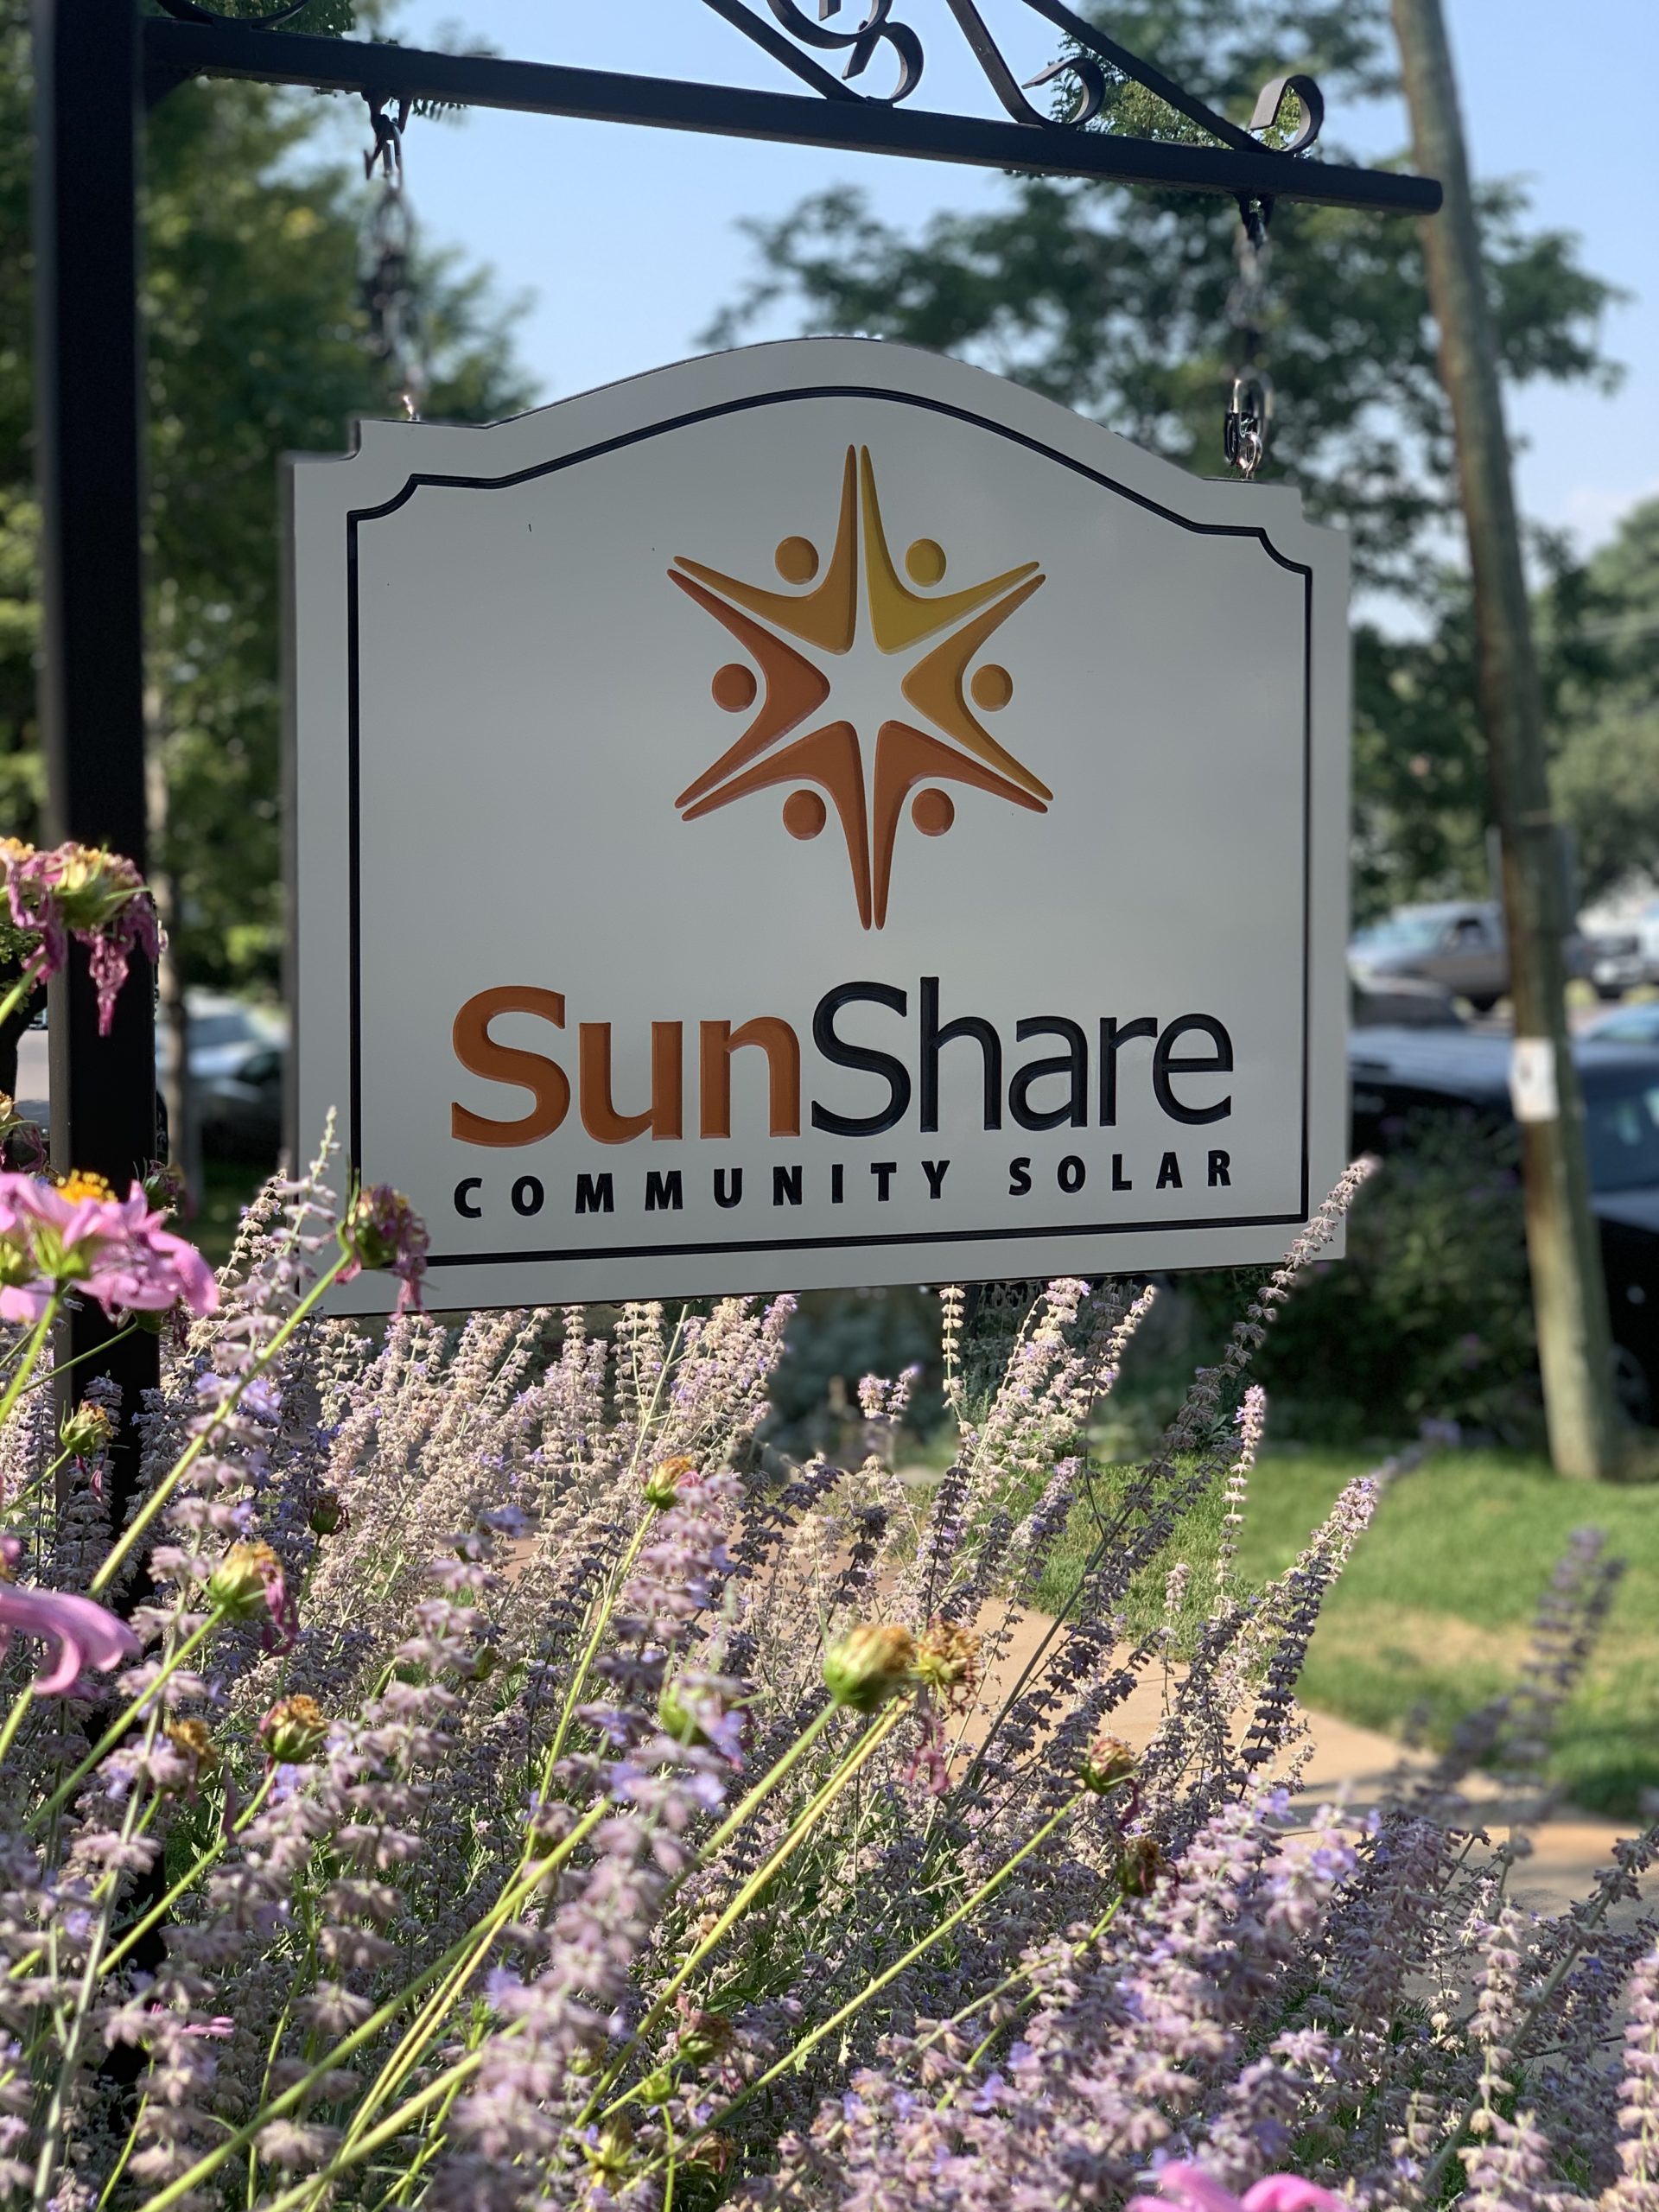 SunShare Secures $30 Million Investment from Ember Infrastructure to Grow Platform of Community Solar Gardens and Renewable Energy Development